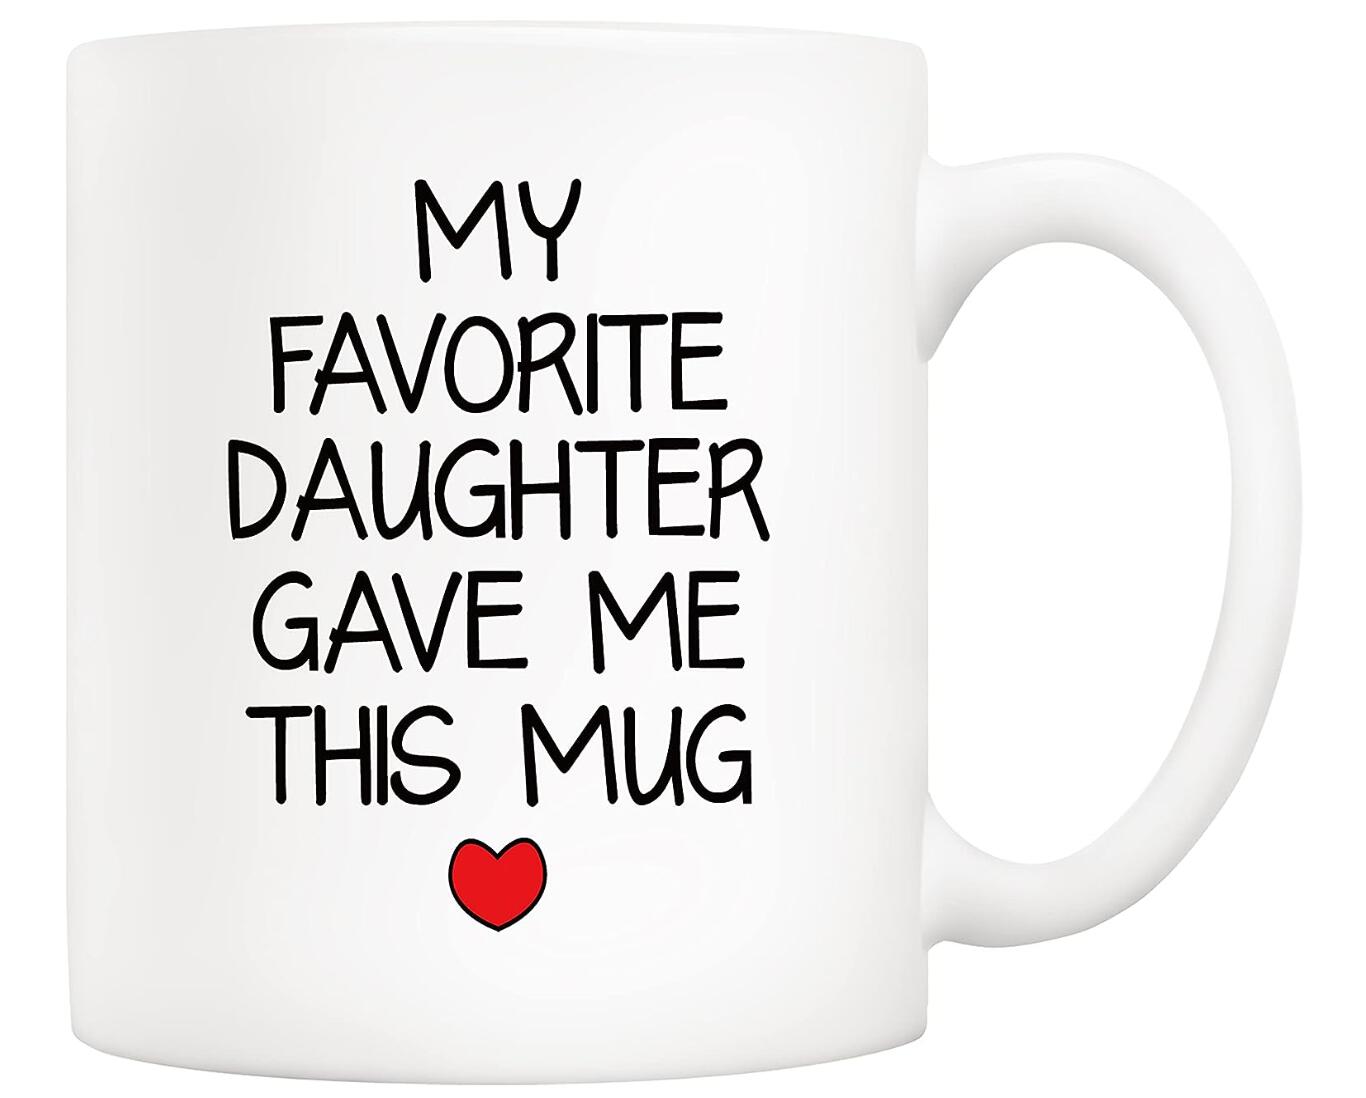 My Favorite Daughter Gave Me This Mug Coffee Mug Father's & Mother's Day Gift Cup